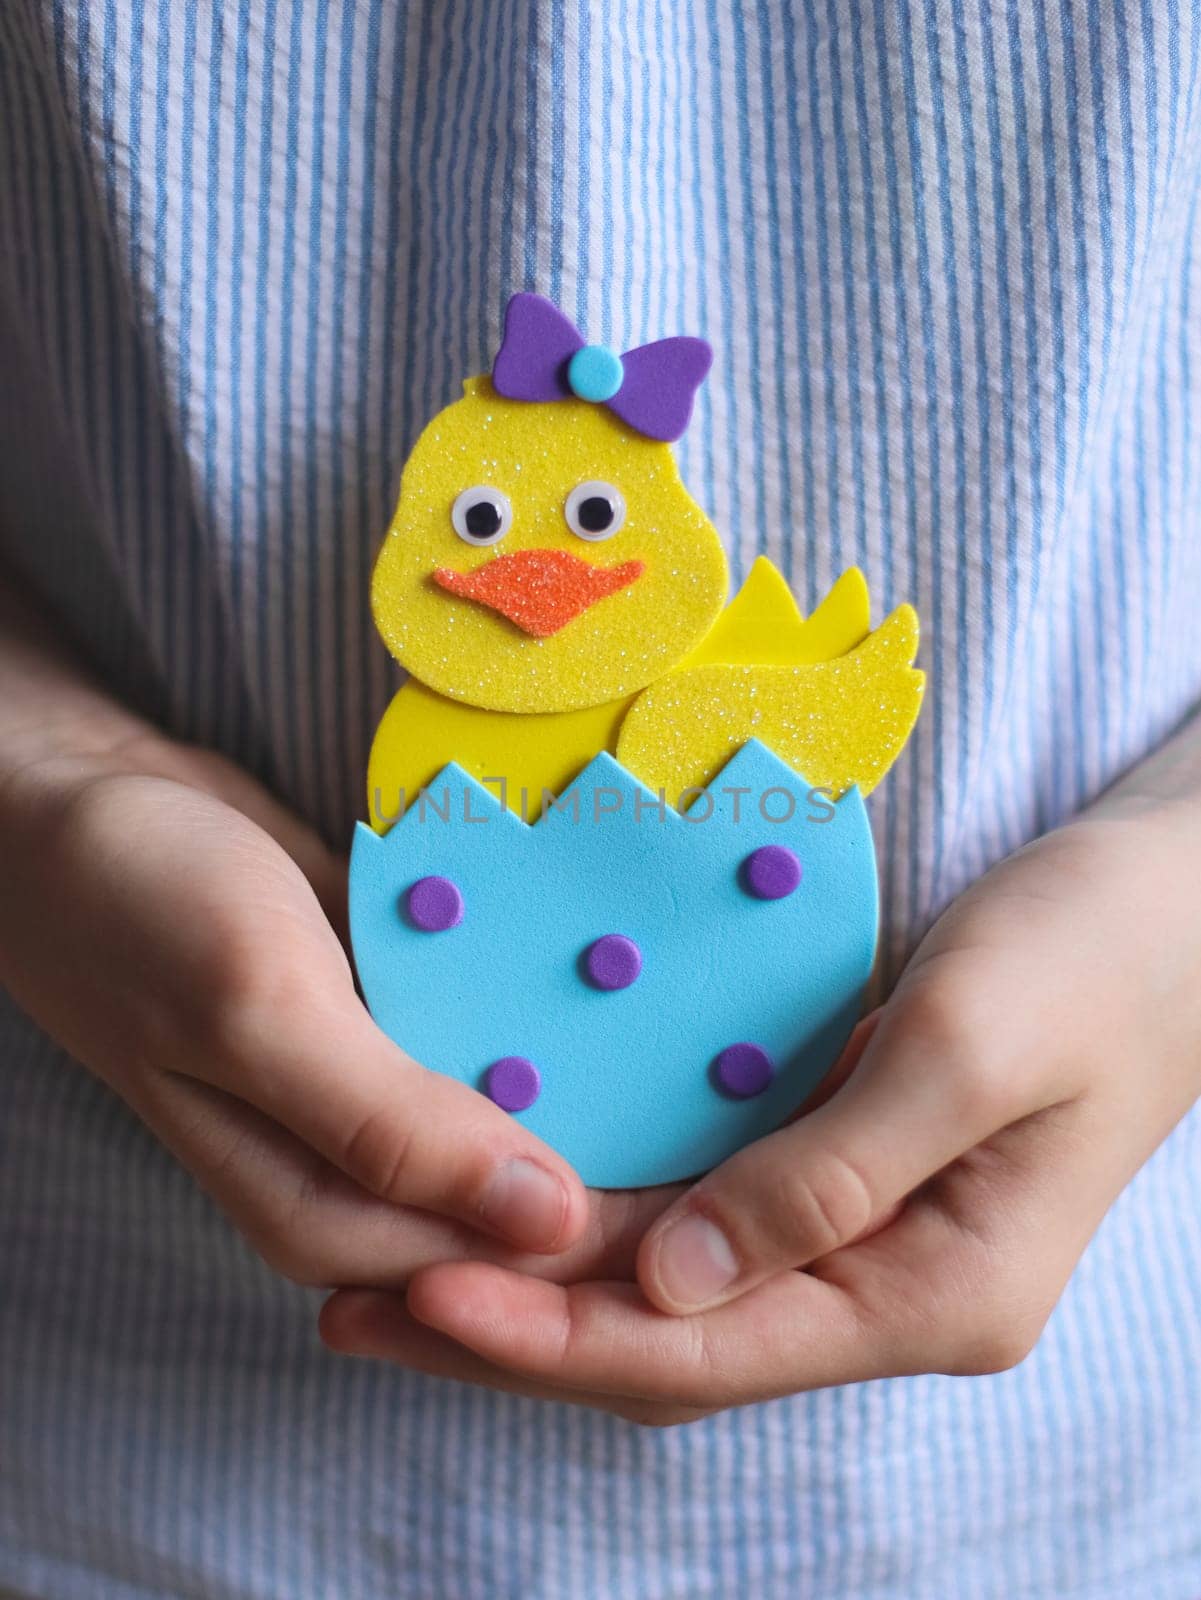 Hands of Caucasian teenage girl showing end result craft of yellow easter felt chicken with blue shell, orange beak, eyes, lilac bow and circles, holding in palms at belly level with blue striped blouse with depth of field, closeup side view. Concept of crafts, diy, needlework, artisanal, children art, easter preparation, children creative.